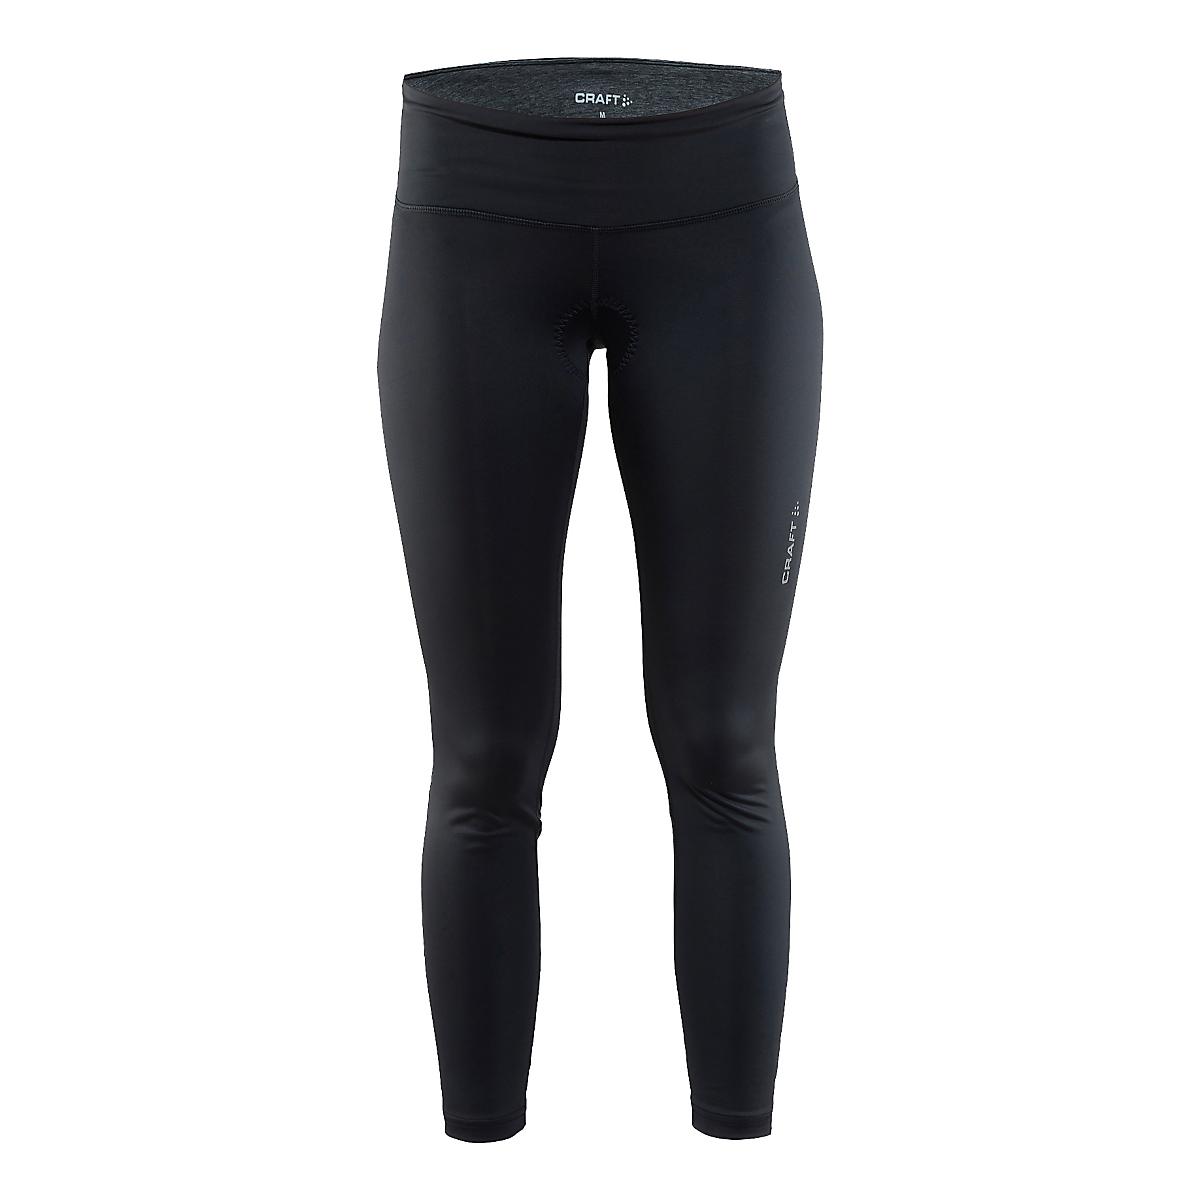 Womens CW-X Insulator Stabilyx Fitted Tights at Road Runner Sports